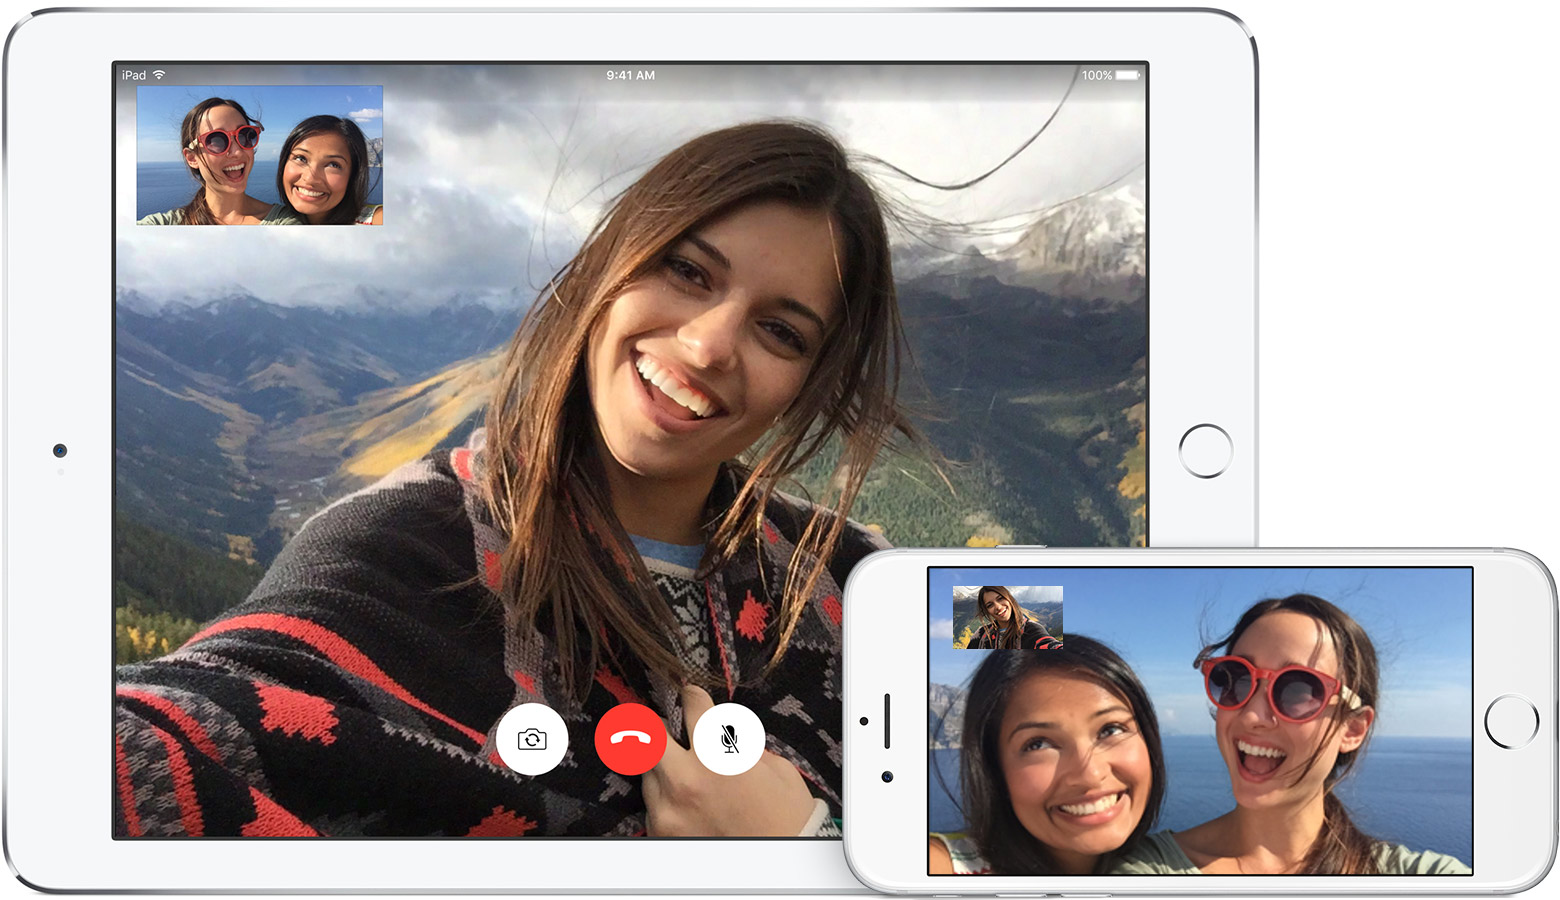 Rumors: FaceTime in group on iOS 11, Touch ID in two stages and facial recognition on “iPhone 8”?